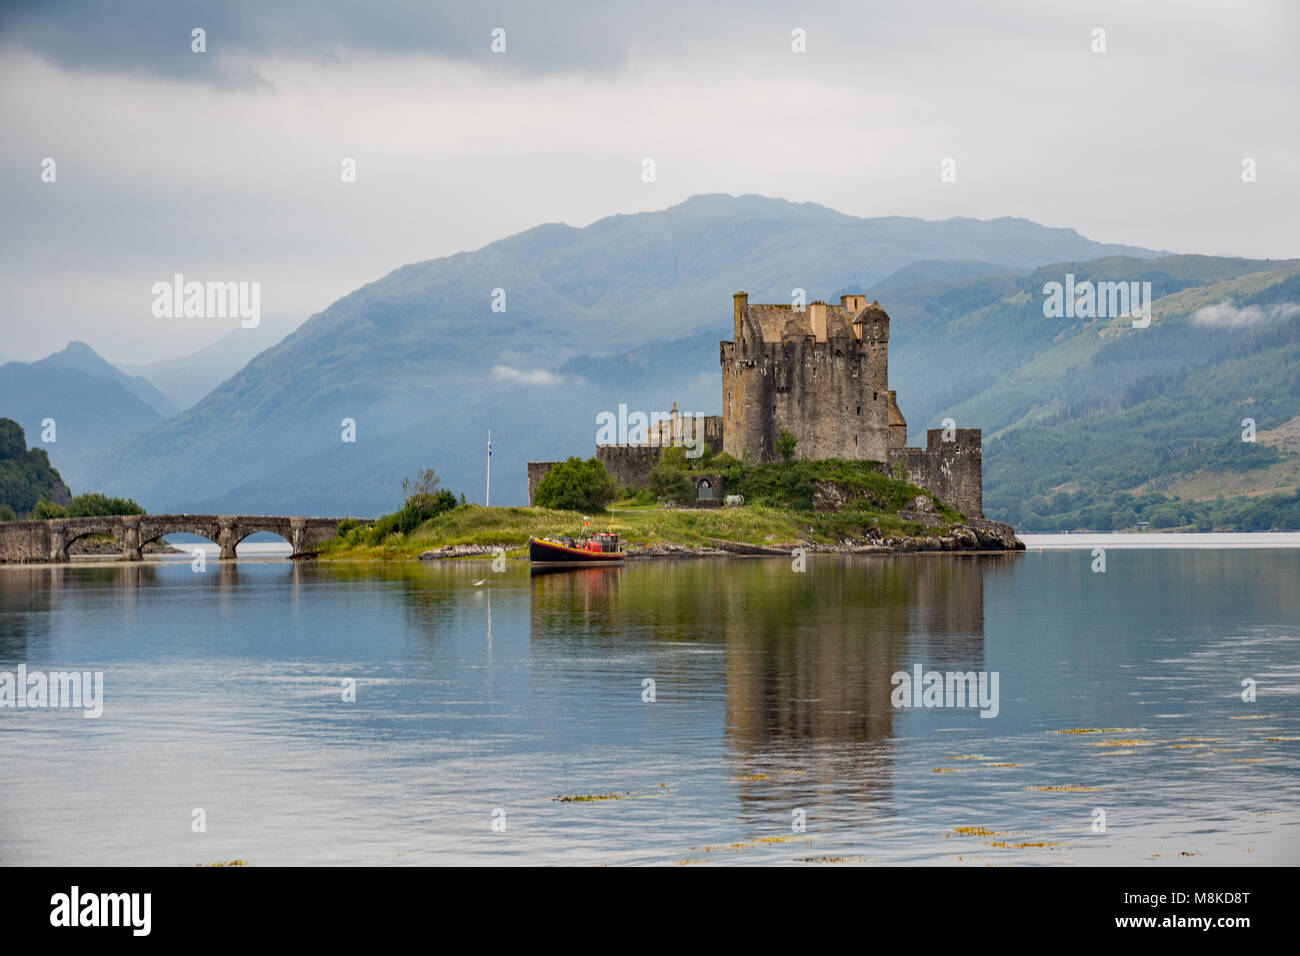 The Eileen Donan (or Island of Donan) Castle is a 13th Century Castle in the Highlands of Scotland. It is one of Scotlands most iconic landmarks. Stock Photo